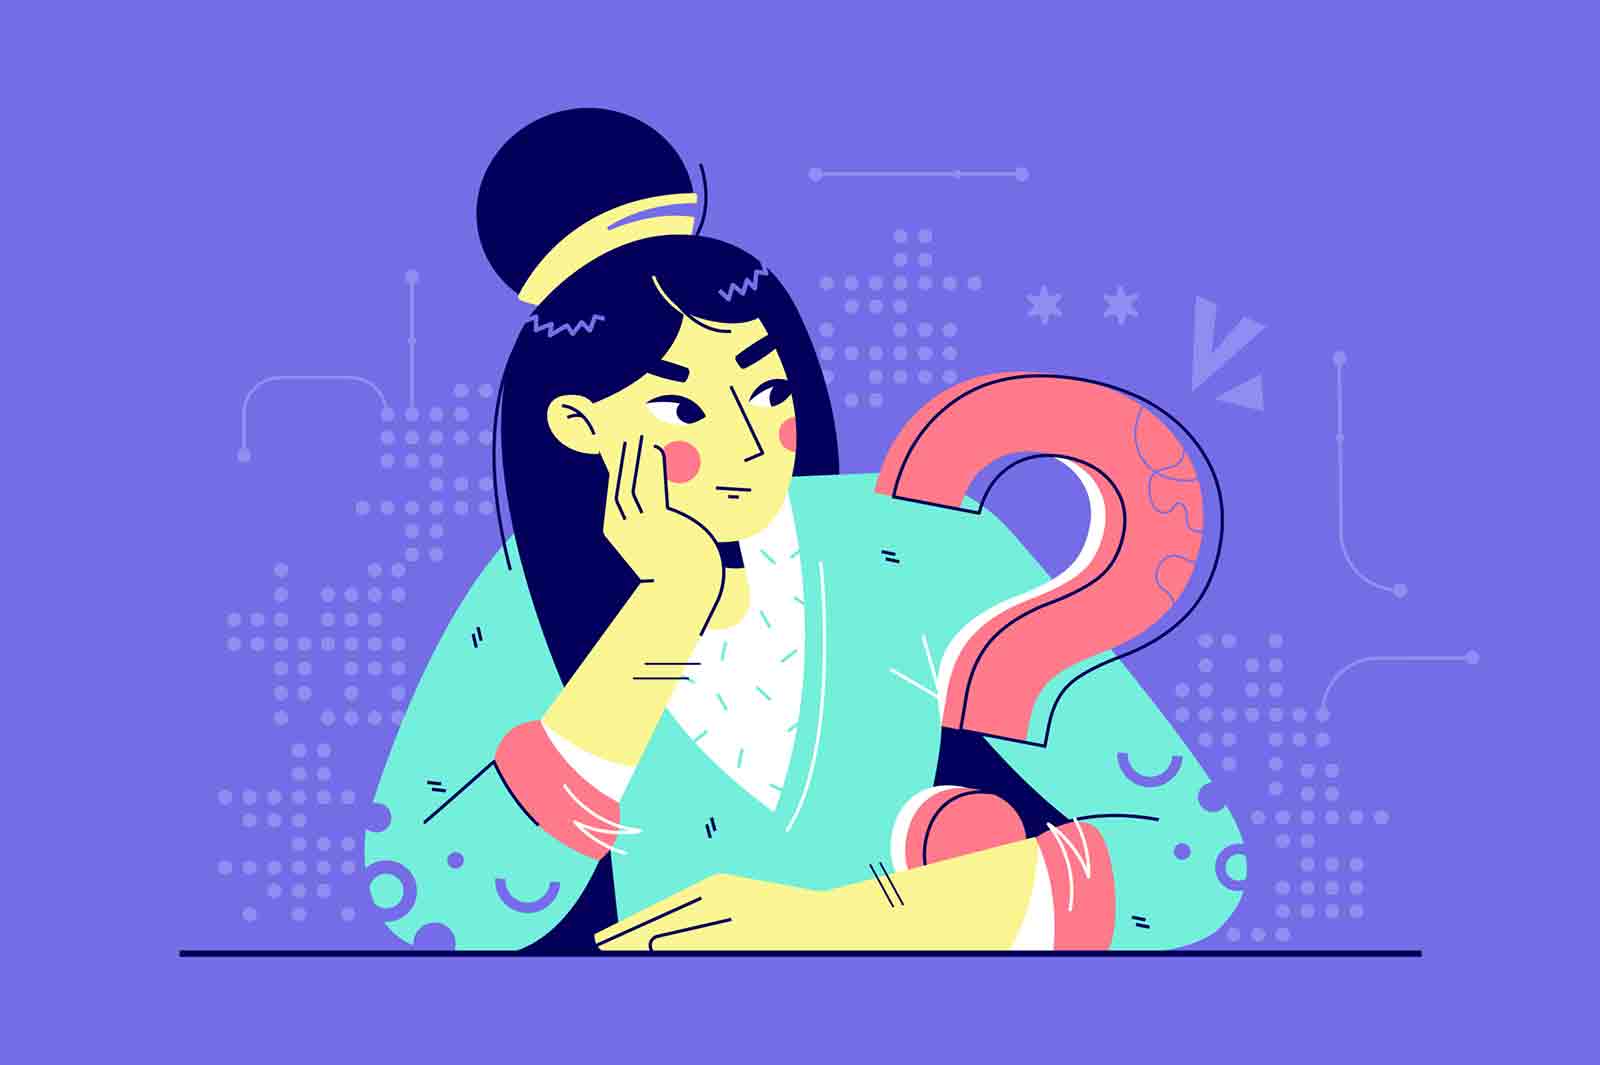 Thoughtful young woman thinking about business near question mark. Concept smiling female character sitting reflects on future on purple background. Vector illustration.